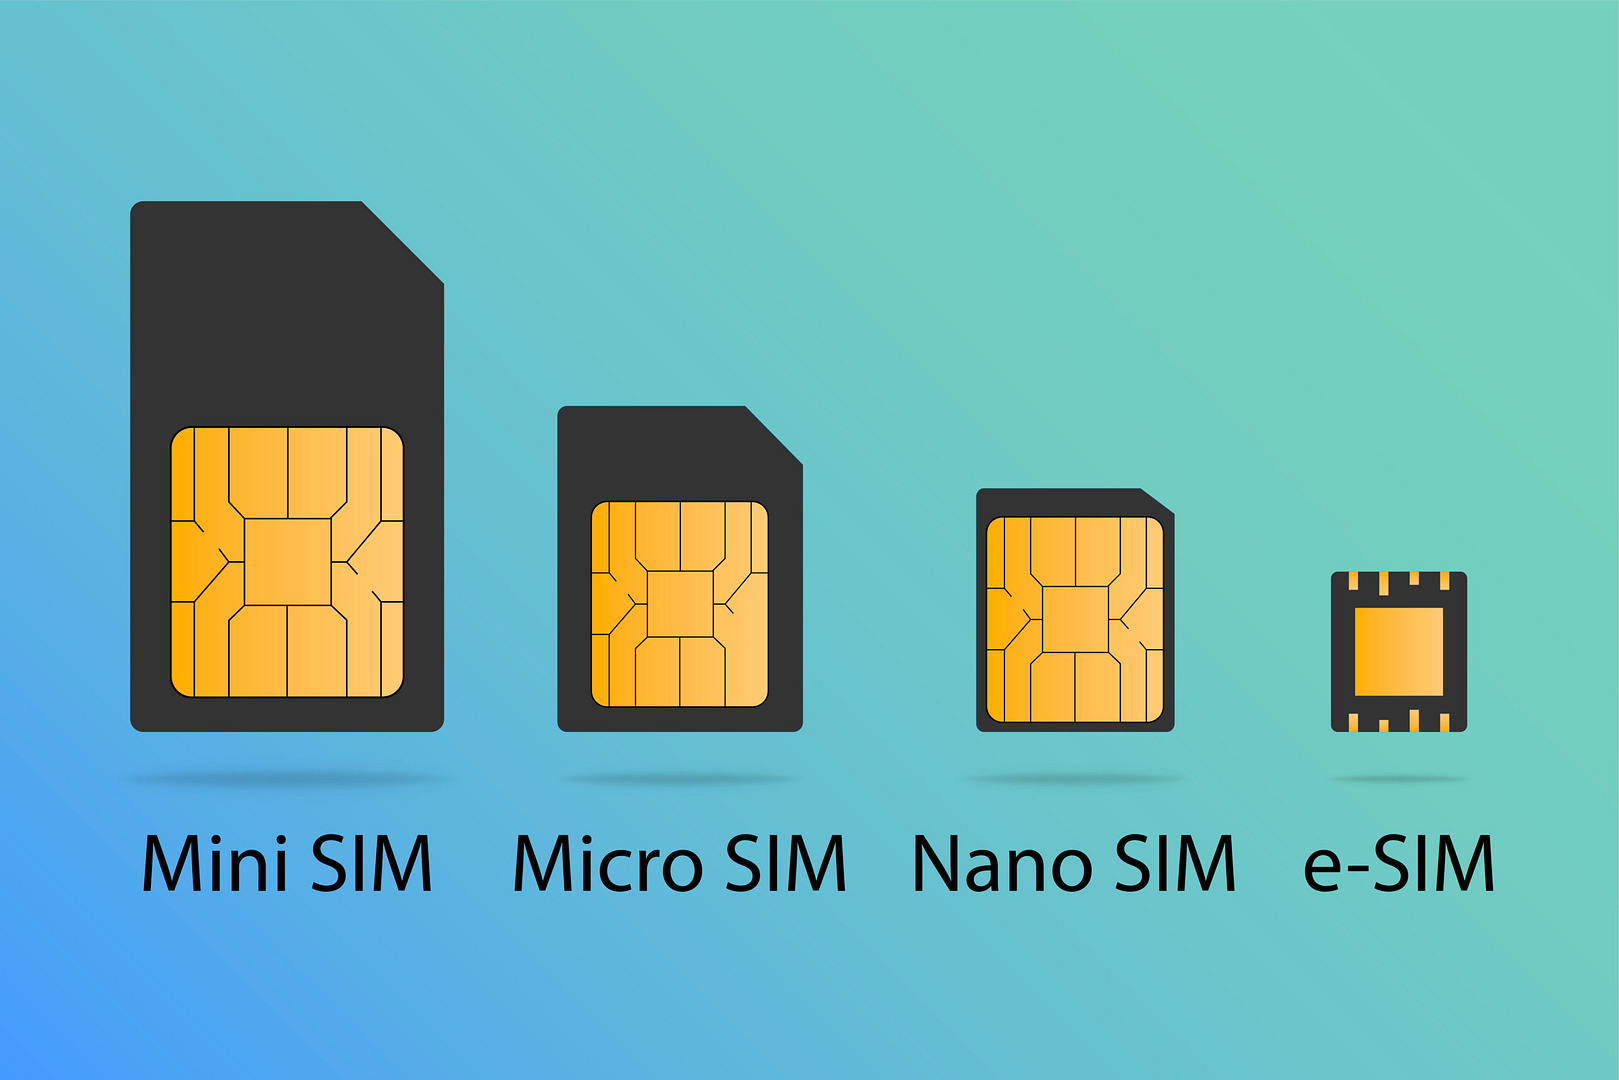 Network Compatibility: Ensure that the eSIM you choose is compatible with the networks in the USA. The major carriers in the USA are AT&T, Verizon, T-Mobile, and Sprint (now part of T-Mobile).</p>
<p>Data Plans: Evaluate the available data plans. Consider your data needs, whether it's for casual browsing or heavy streaming. Choose a plan that matches your usage.</p>
<p>Coverage: Check the coverage map to see if the eSIM provider has good coverage in the areas you plan to visit within the USA. Some remote areas might not have reliable coverage.</p>
<p>International Roaming: If you plan to travel outside the USA, inquire about international roaming options and costs. Some eSIMs may offer better international coverage and rates than others.</p>
<p>Voice and Messaging: If you need voice and messaging services, ensure that these are included in the eSIM plan. Some eSIMs may only offer data services.</p>
<p>Compatibility with Your Device: Confirm that your device is eSIM-compatible. Many modern smartphones and tablets support eSIMs, but older devices may not.</p>
<p>Activation Process: Check the activation process. Some eSIMs can be activated instantly through an app, while others may require more time and verification.</p>
<p>App Support: Look for eSIM providers that offer user-friendly apps to manage your account, check data usage, and make payments.</p>
<p>Duration and Flexibility: Consider the duration of the eSIM plan. Some eSIMs offer flexibility with pay-as-you-go options, while others require a longer commitment.</p>
<p>Customer Support: Research the quality of customer support provided by the eSIM provider. Responsive customer support can be crucial if you encounter issues or have questions.</p>
<p>Remember that the eSIM market is continually evolving, so it's a good idea to read reviews, compare different providers, and choose the one that best suits your specific needs and preferences. Additionally, verify the terms and conditions, including any hidden fees, before making a final decision.